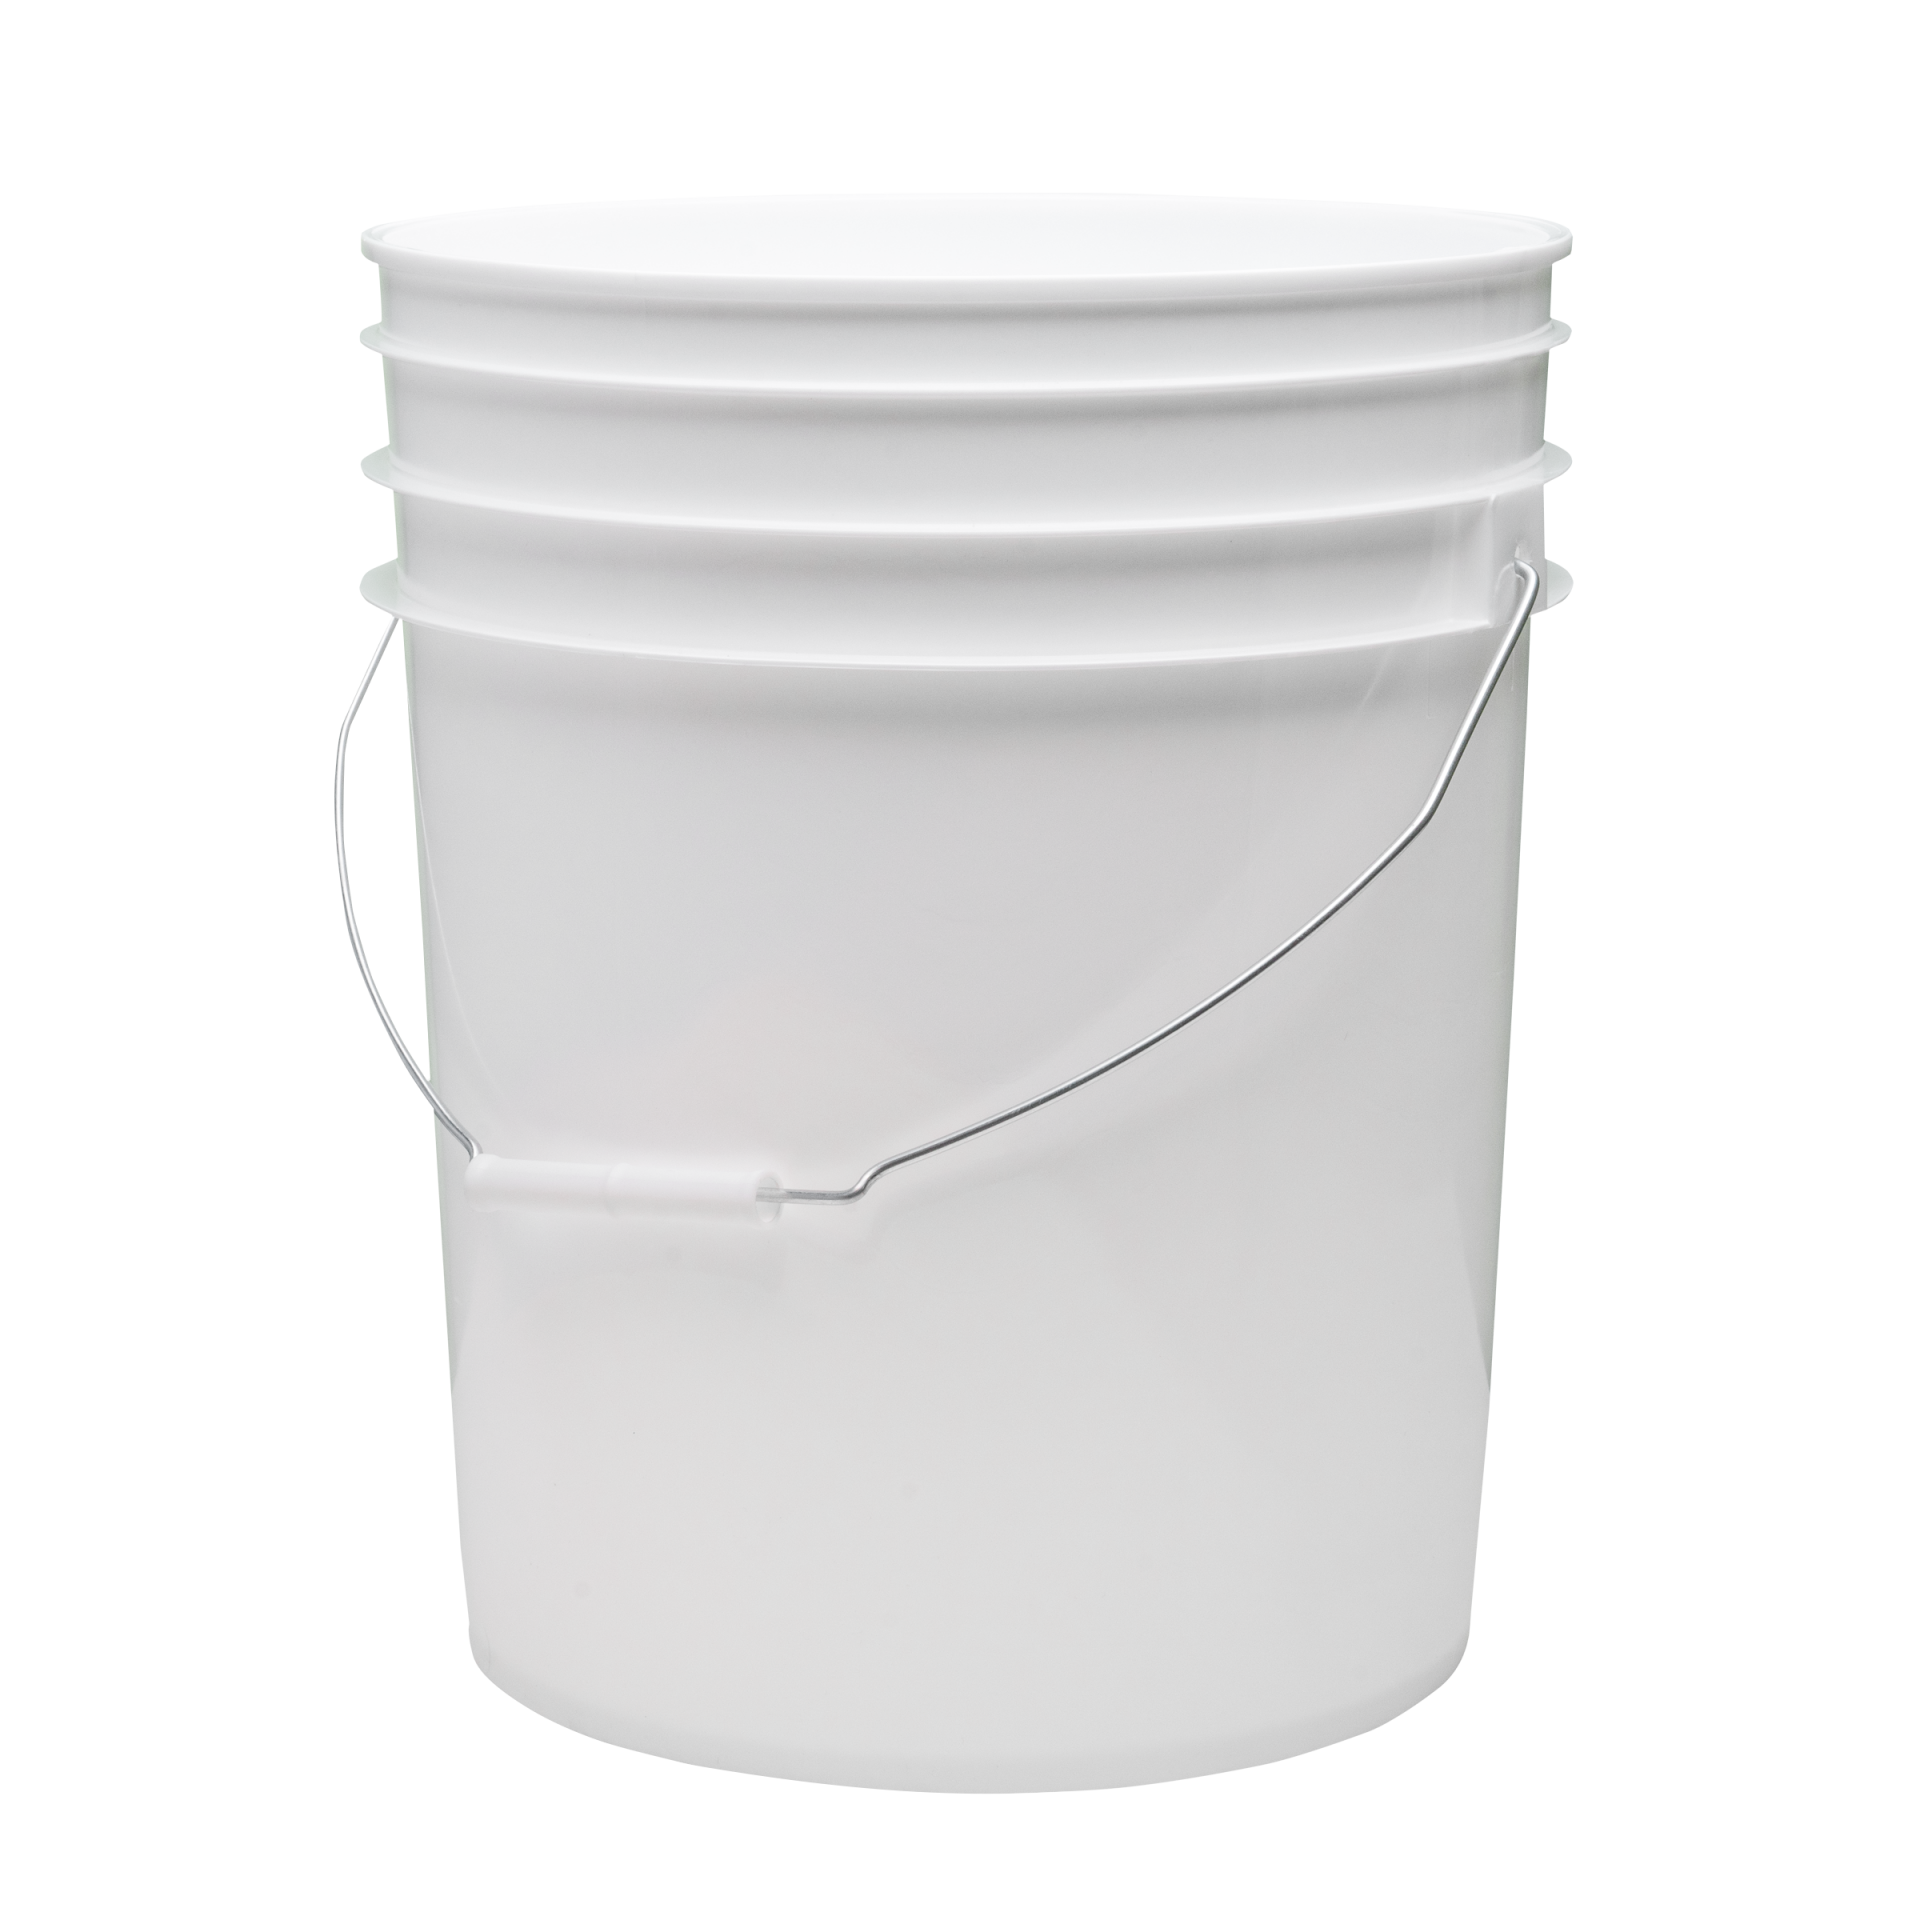 https://www.containersupplycompany.com/wp-content/uploads/2020/03/5-Gallon-Pail-1920x1920.png